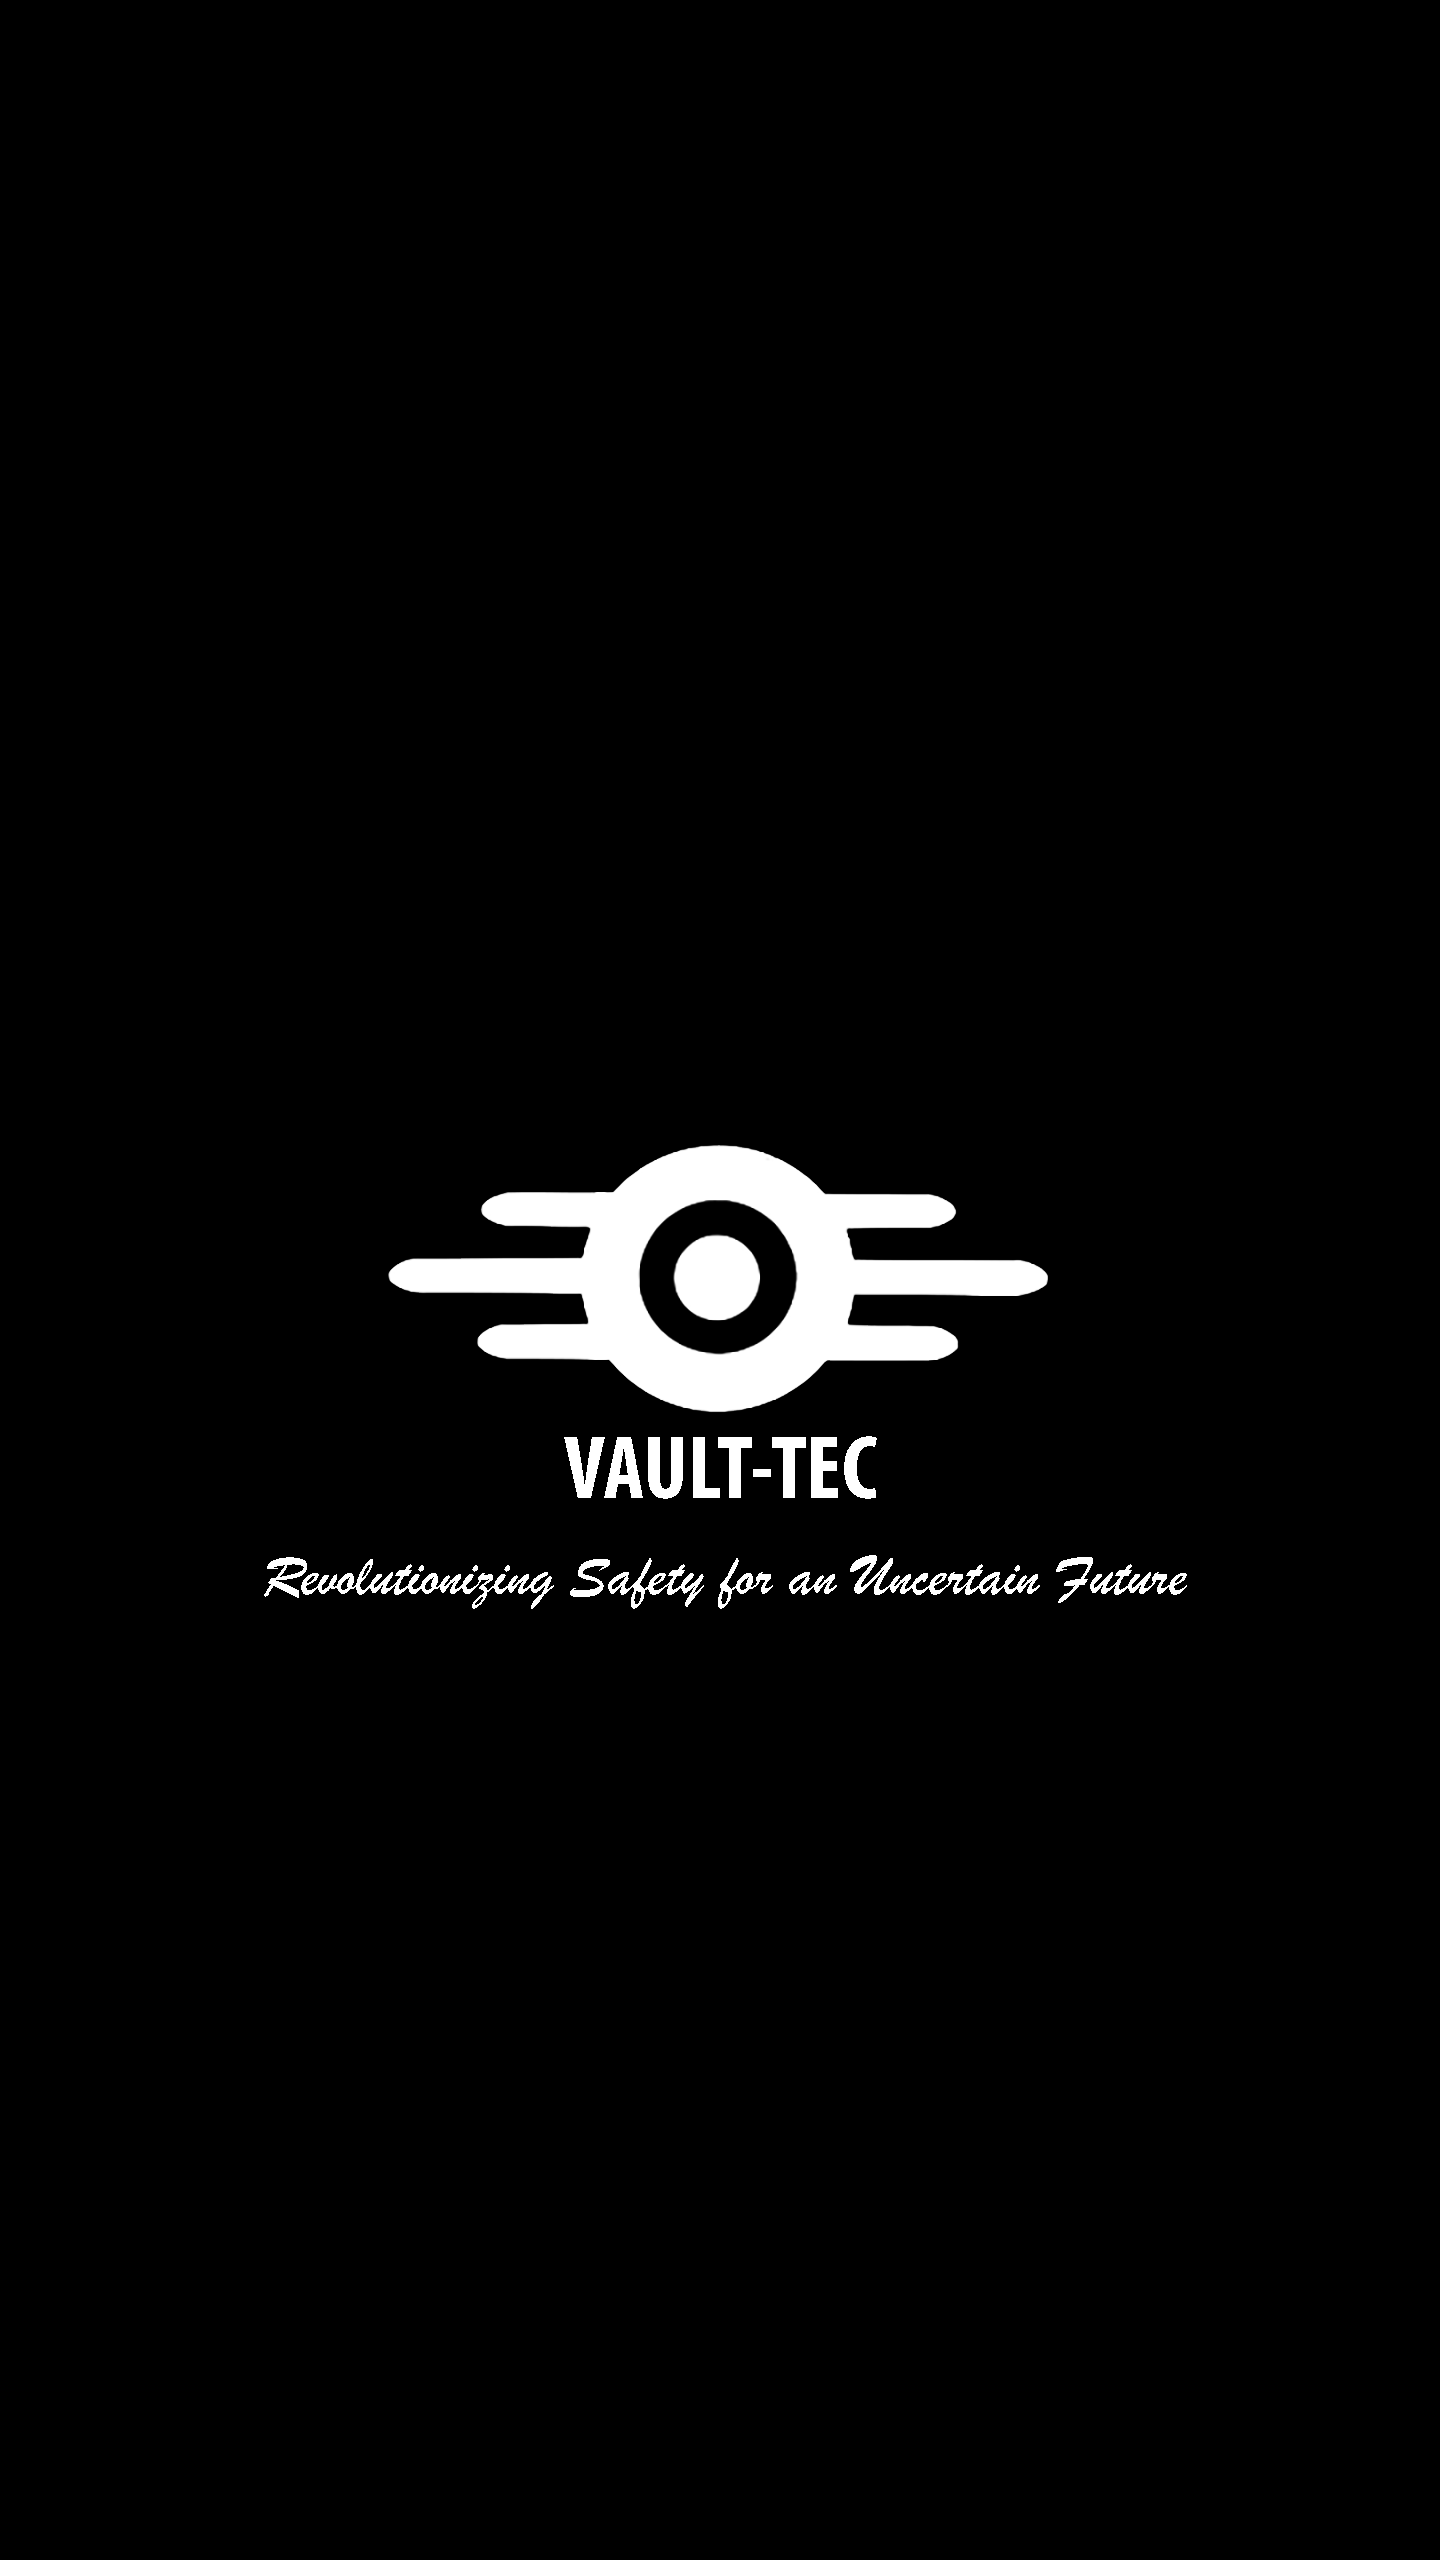 Simple Vault Tec Wallpaper That I Made 1080p, Other Sizes